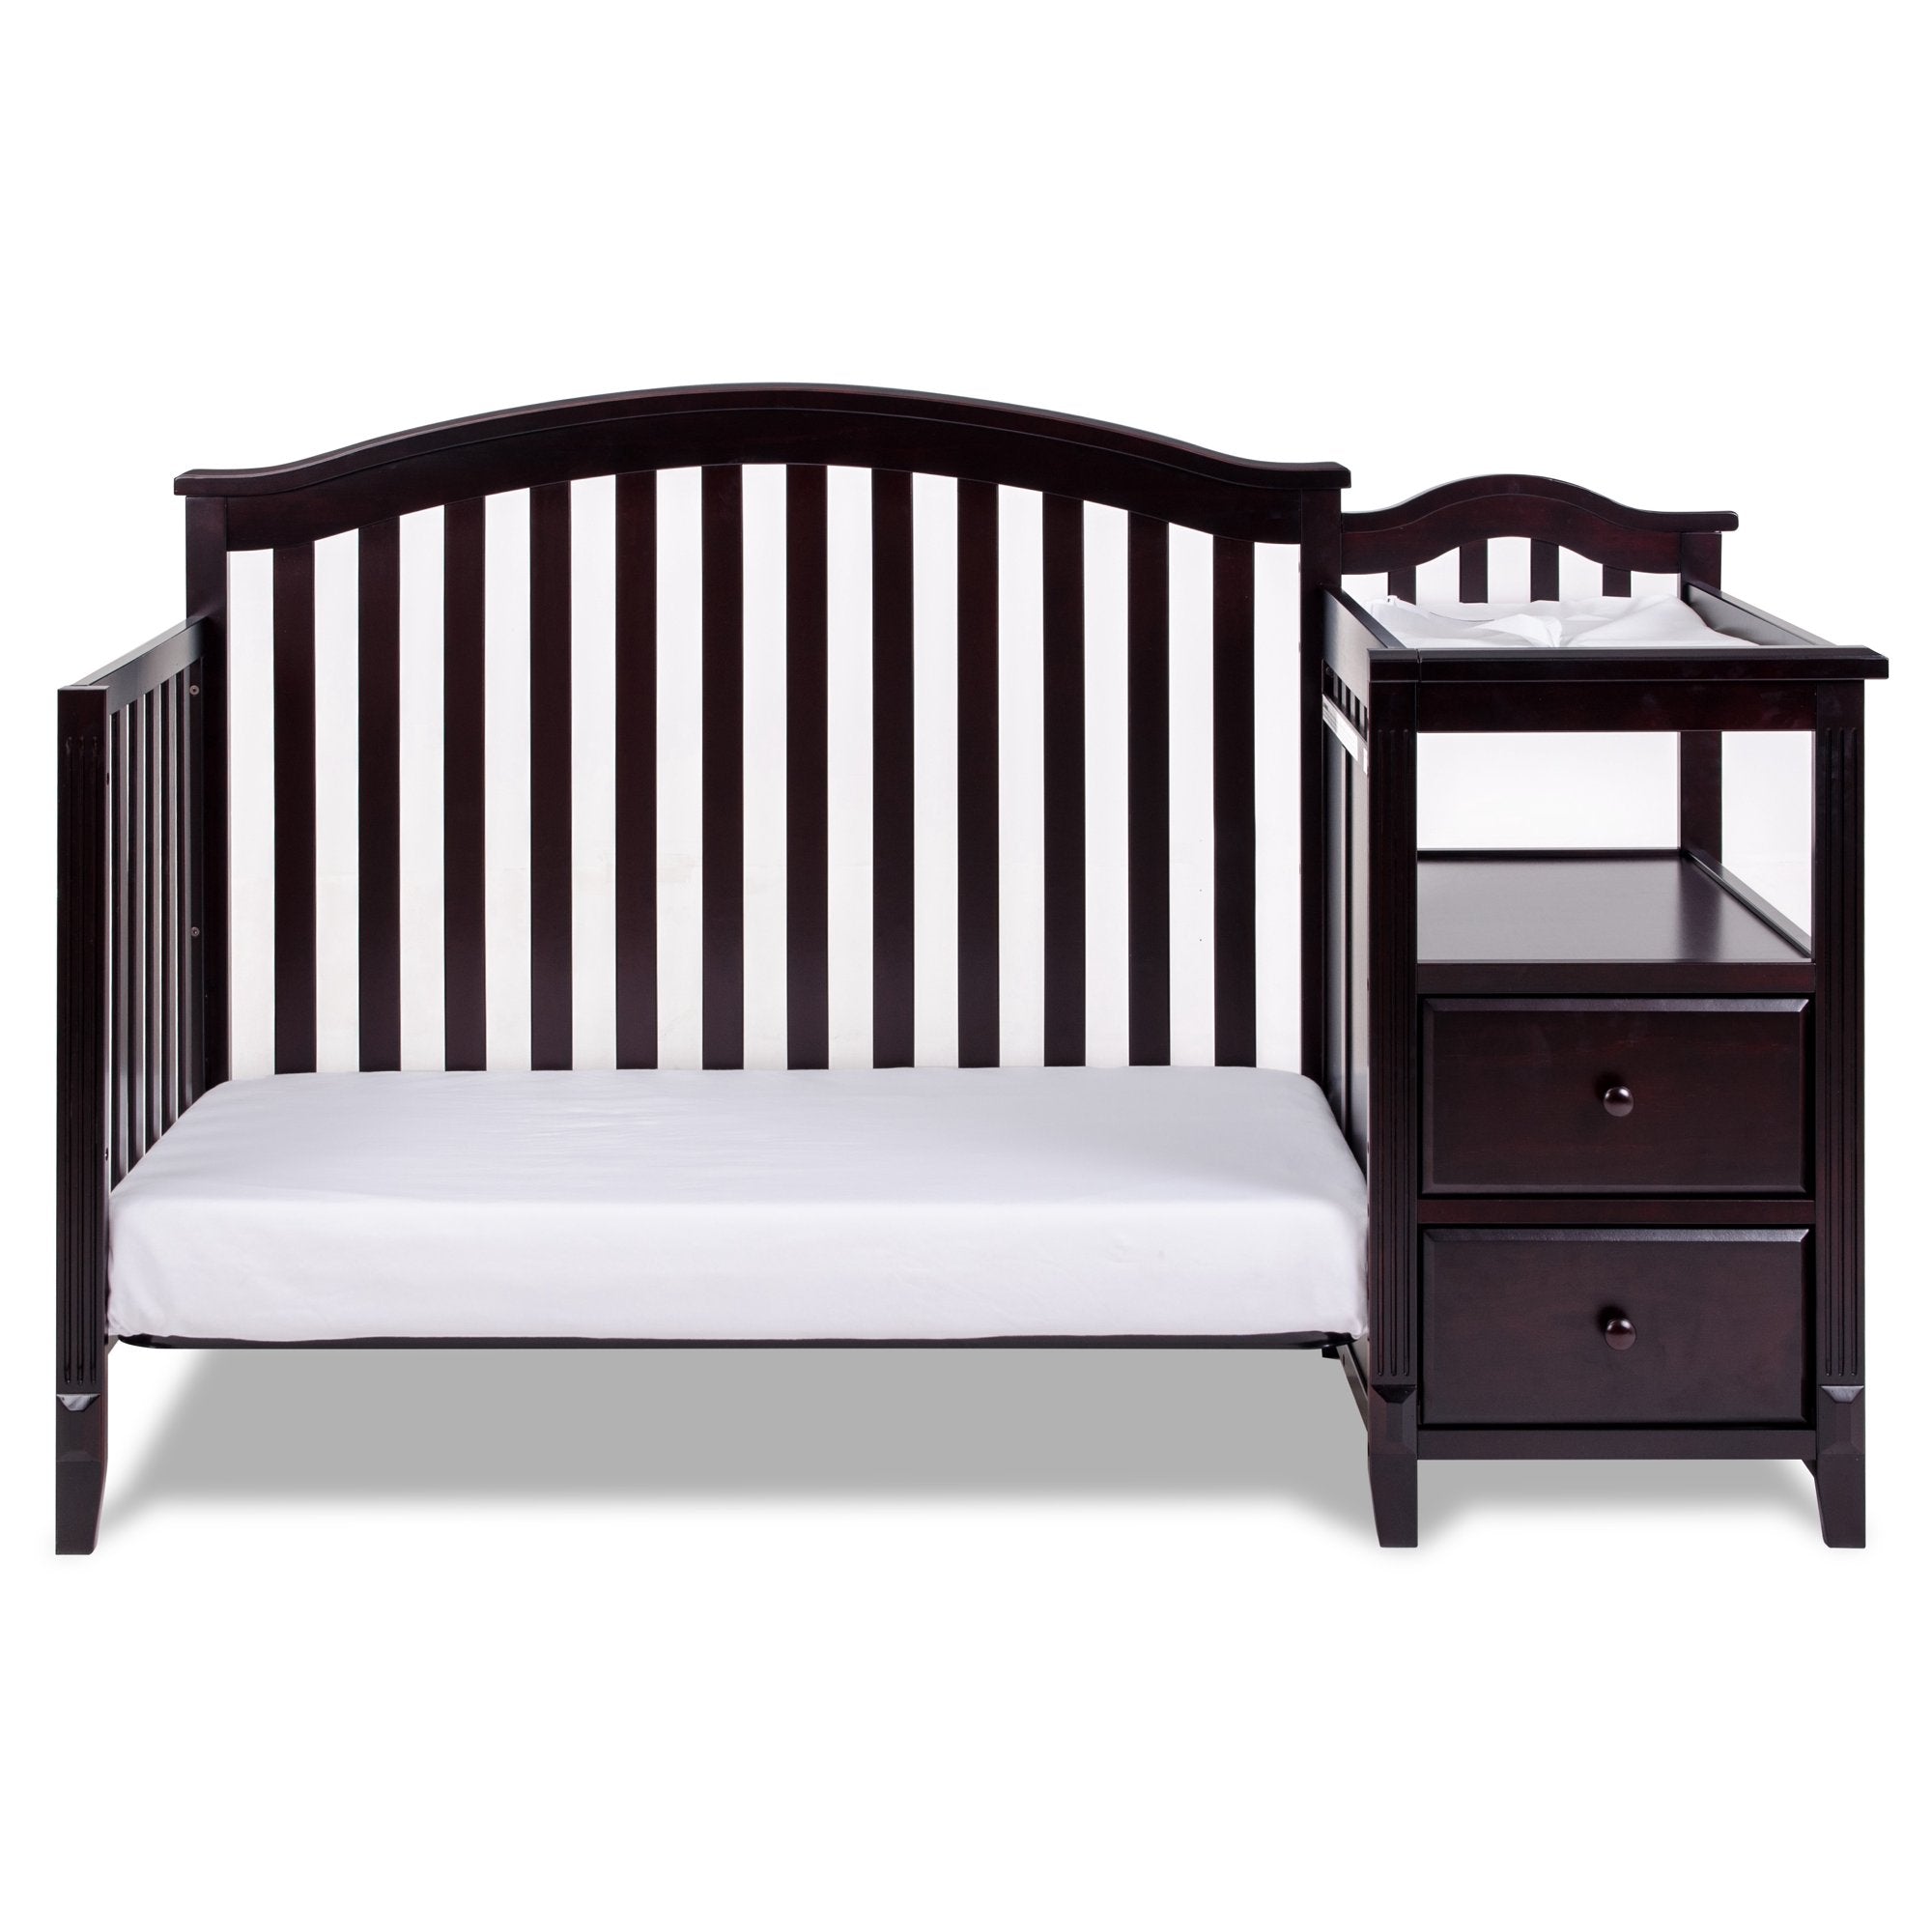 BABY WOODEN COT DLX WITH CHANGER TABLE - BC-1100-E